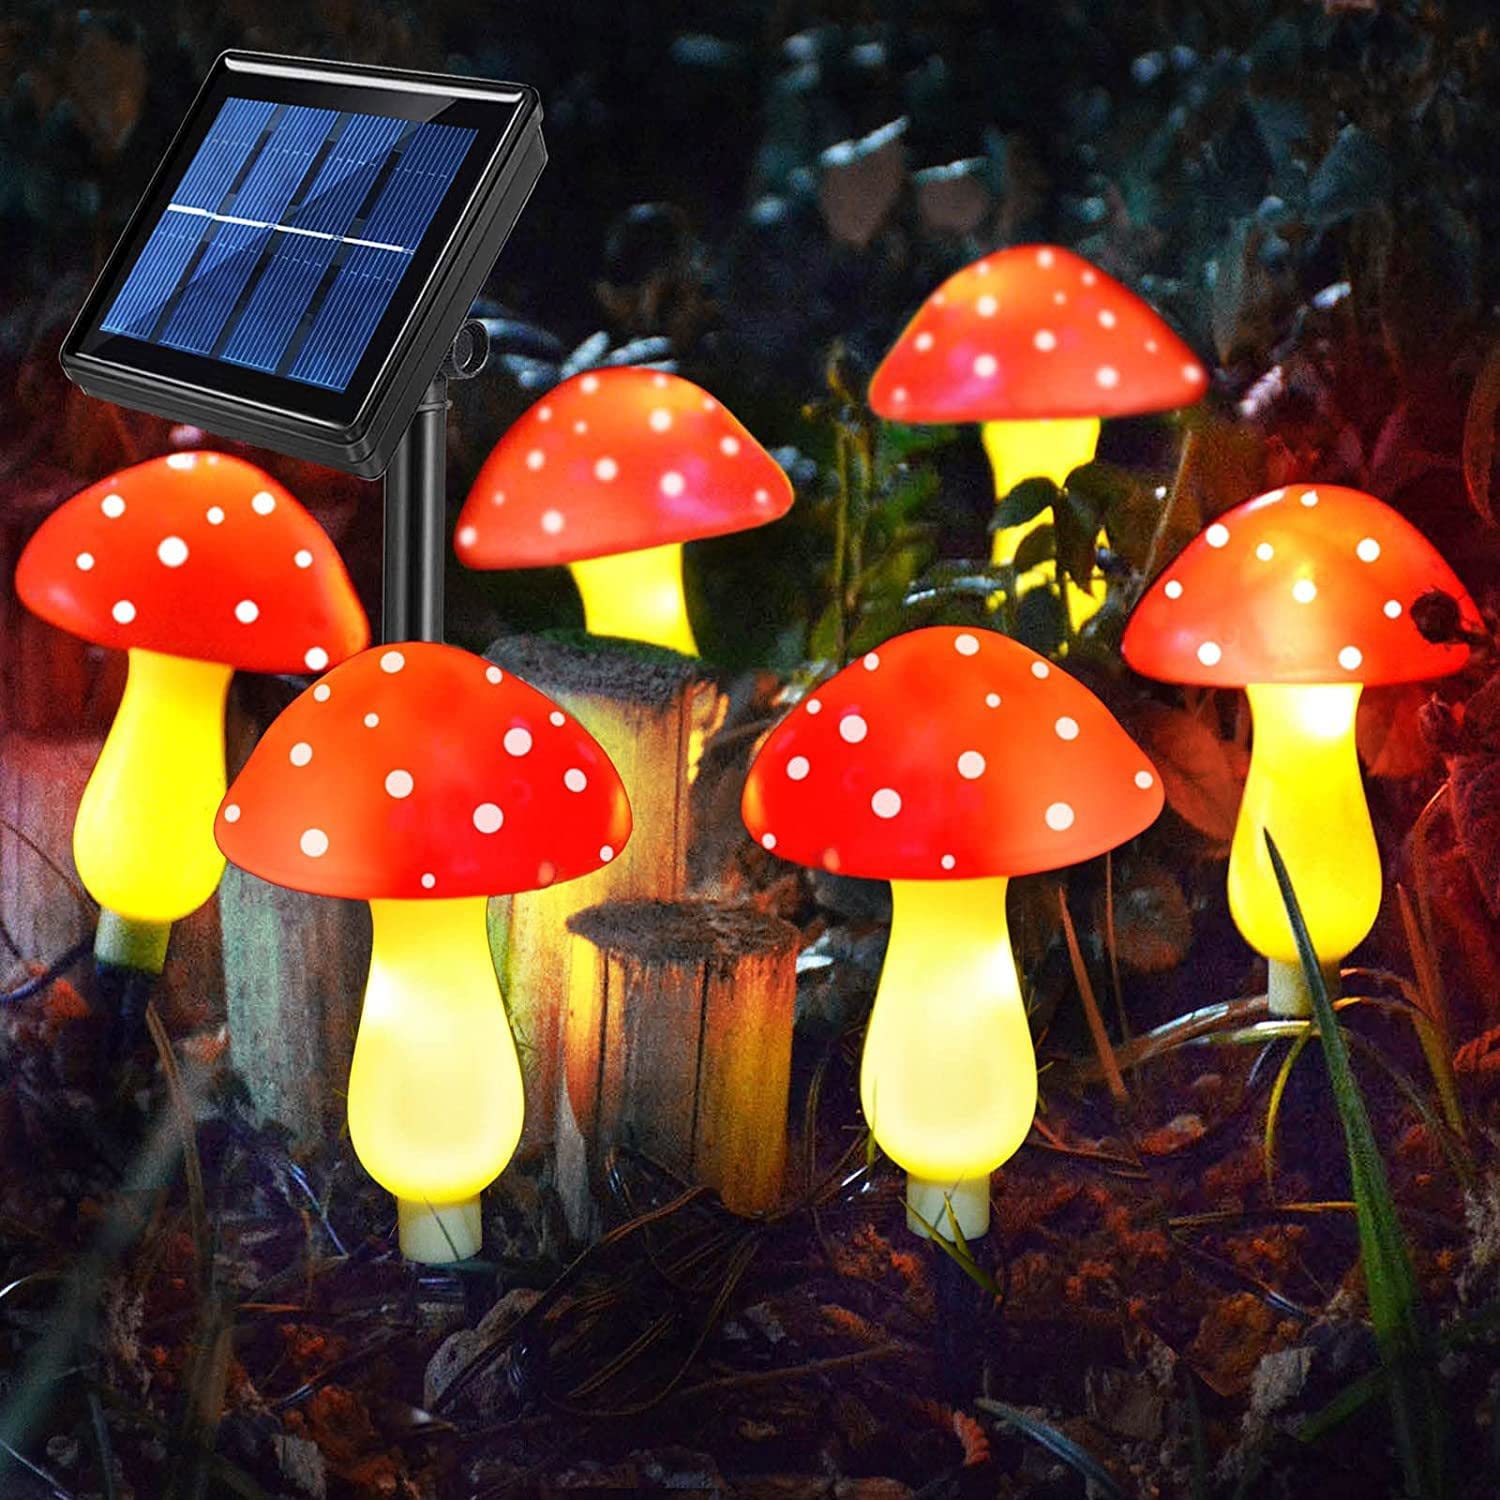 Set of 6 Garden Solar Lights, Solar Powered Mushroom Lamps for Outdoor Decorations, Waterproof Garden Ornaments for Backyard Lawn Pathway Landscape Fence Christmas Yard Decorations, Red